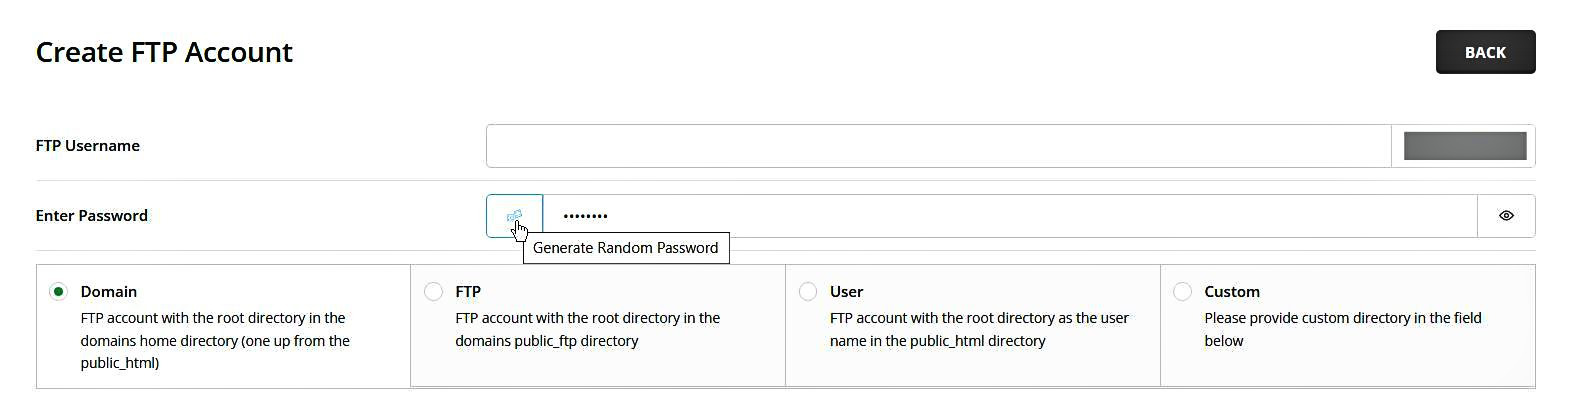 Creating additional FTP accounts 